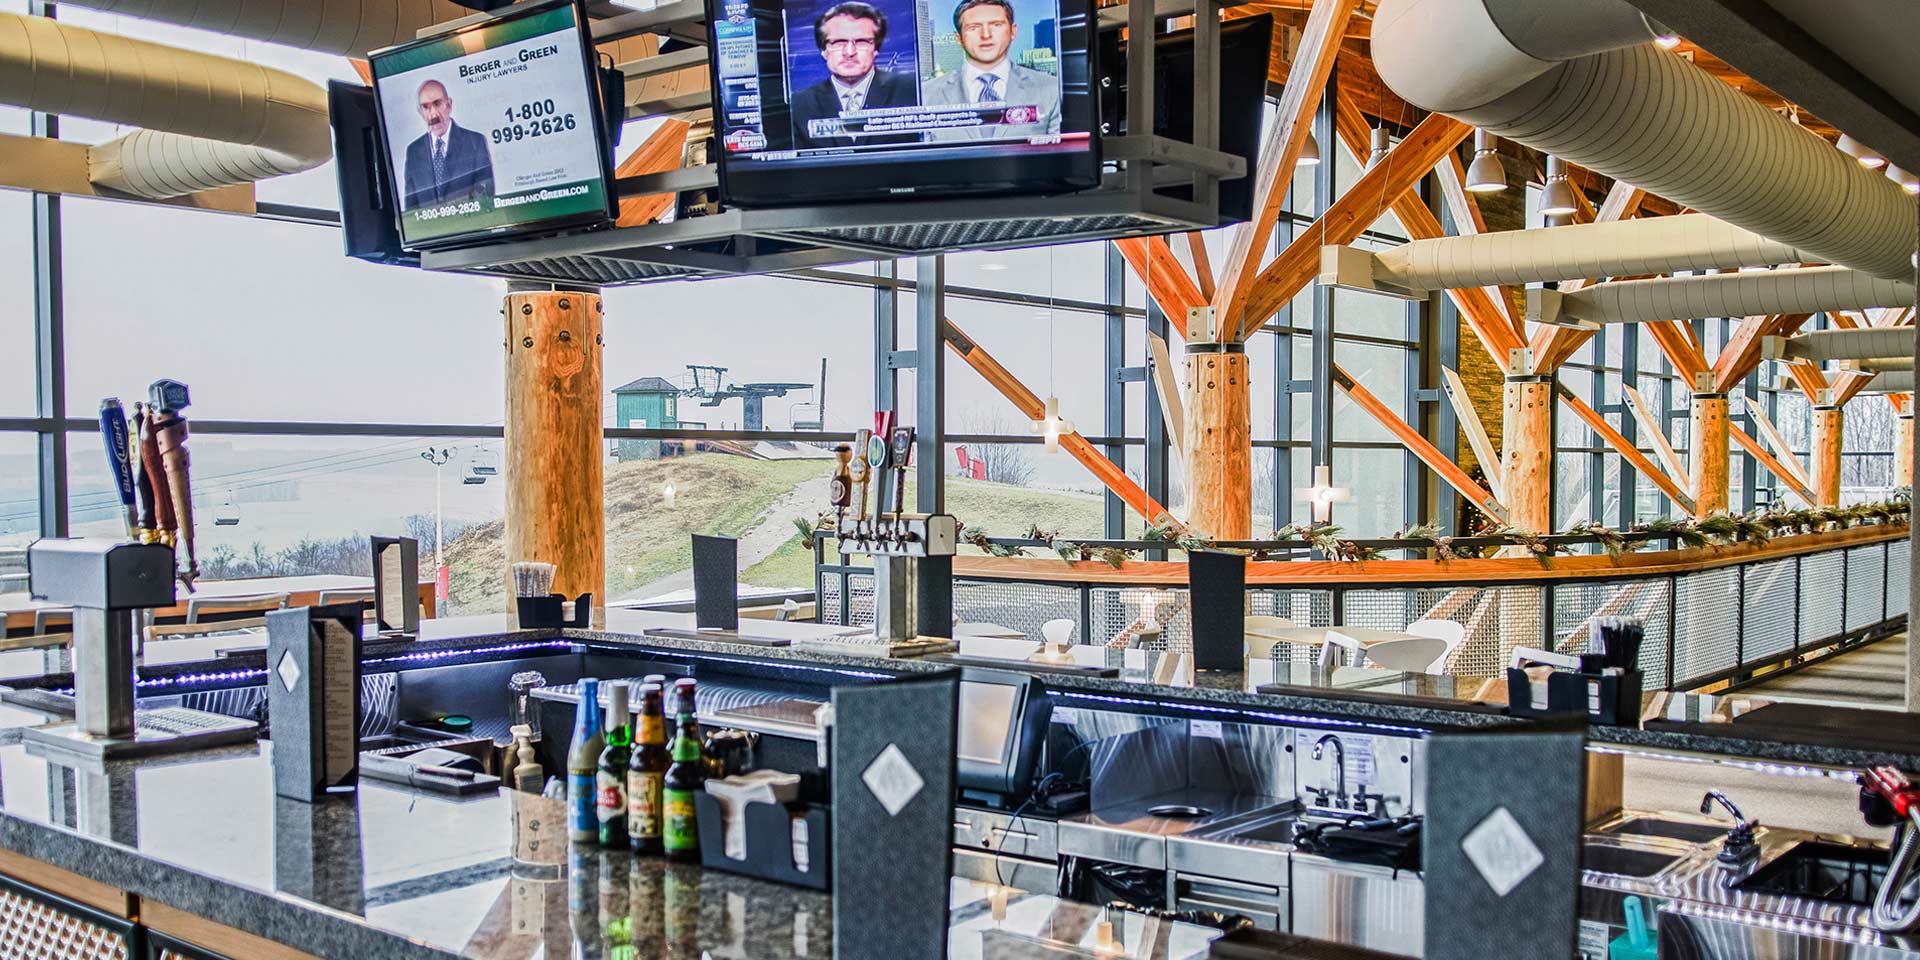 Sports bar area with tvs